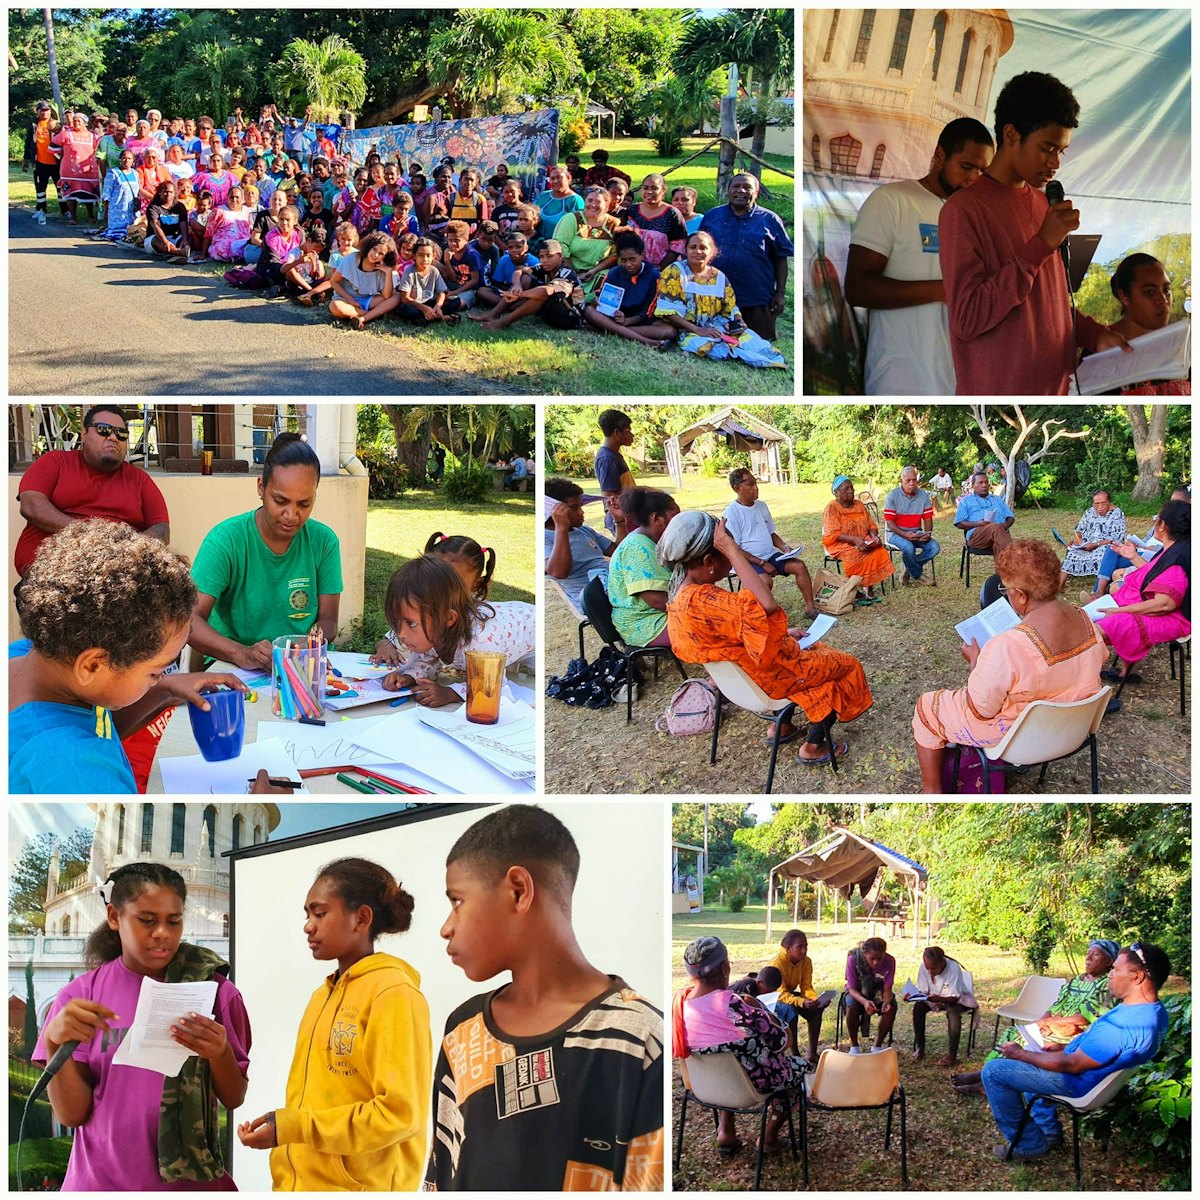 Pictured here are participants at a gathering in the region of Gatope, New Caledonia. At the conference, youth spoke about their experiences in serving as teachers of children’s moral education classes and how these activities are contributing to building capacity in the next generation to serve their society.